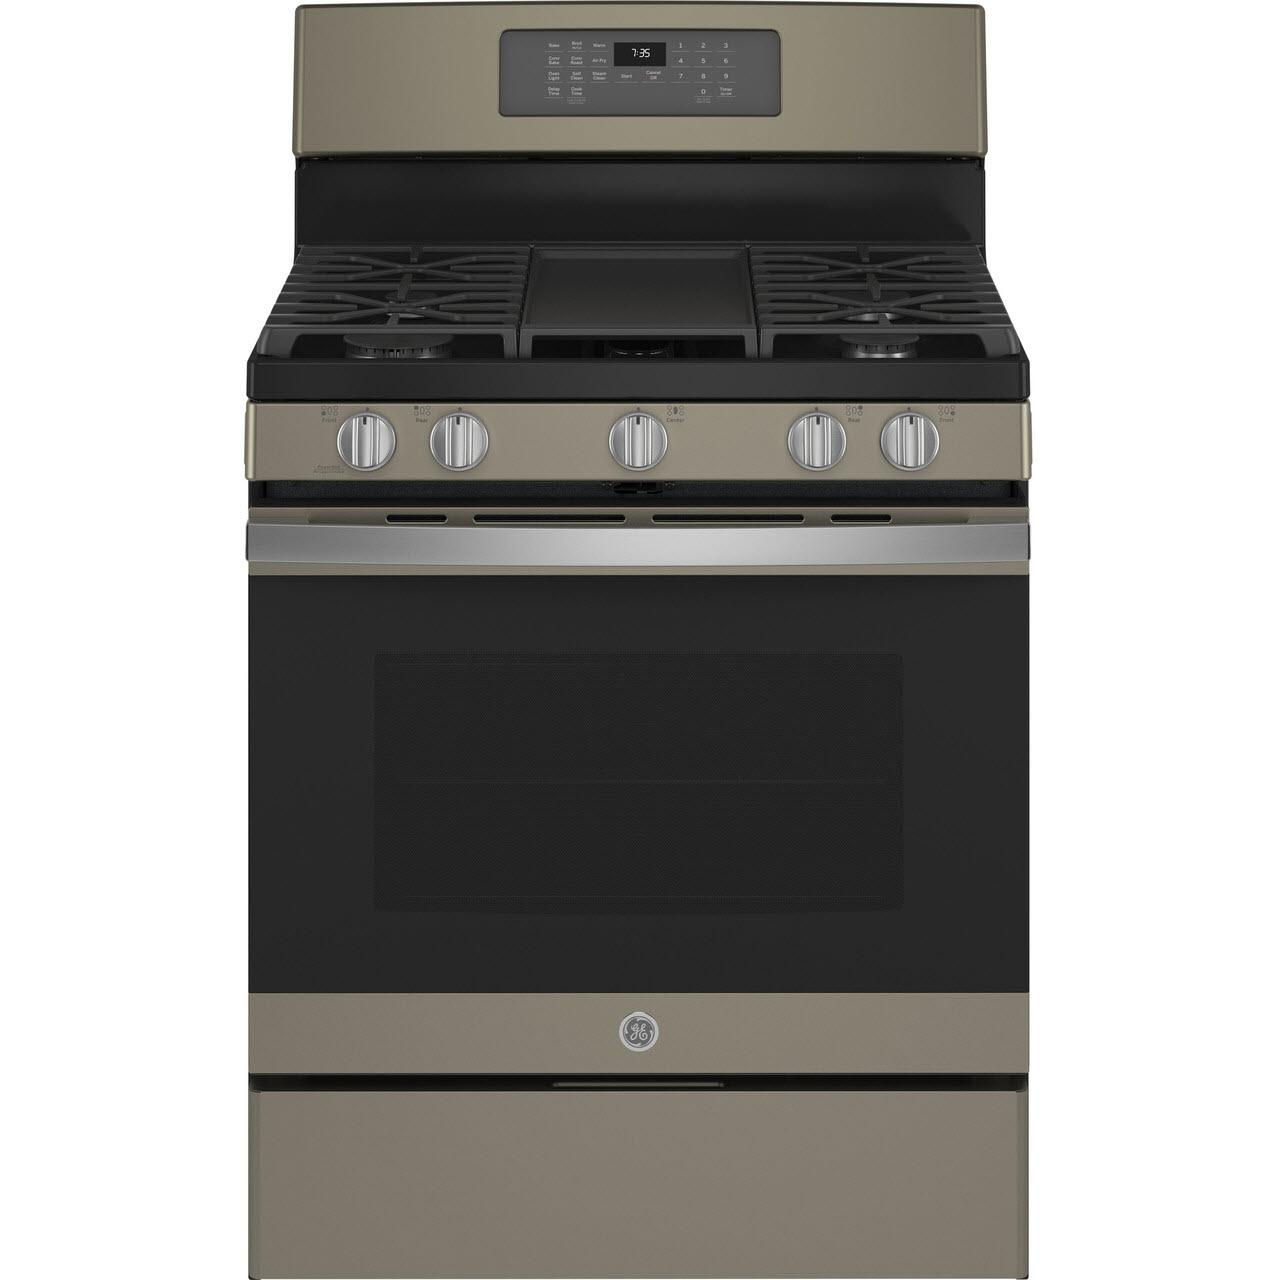 GE 30-inch Freestanding Gas Range with Convection Technology JGB735EPES